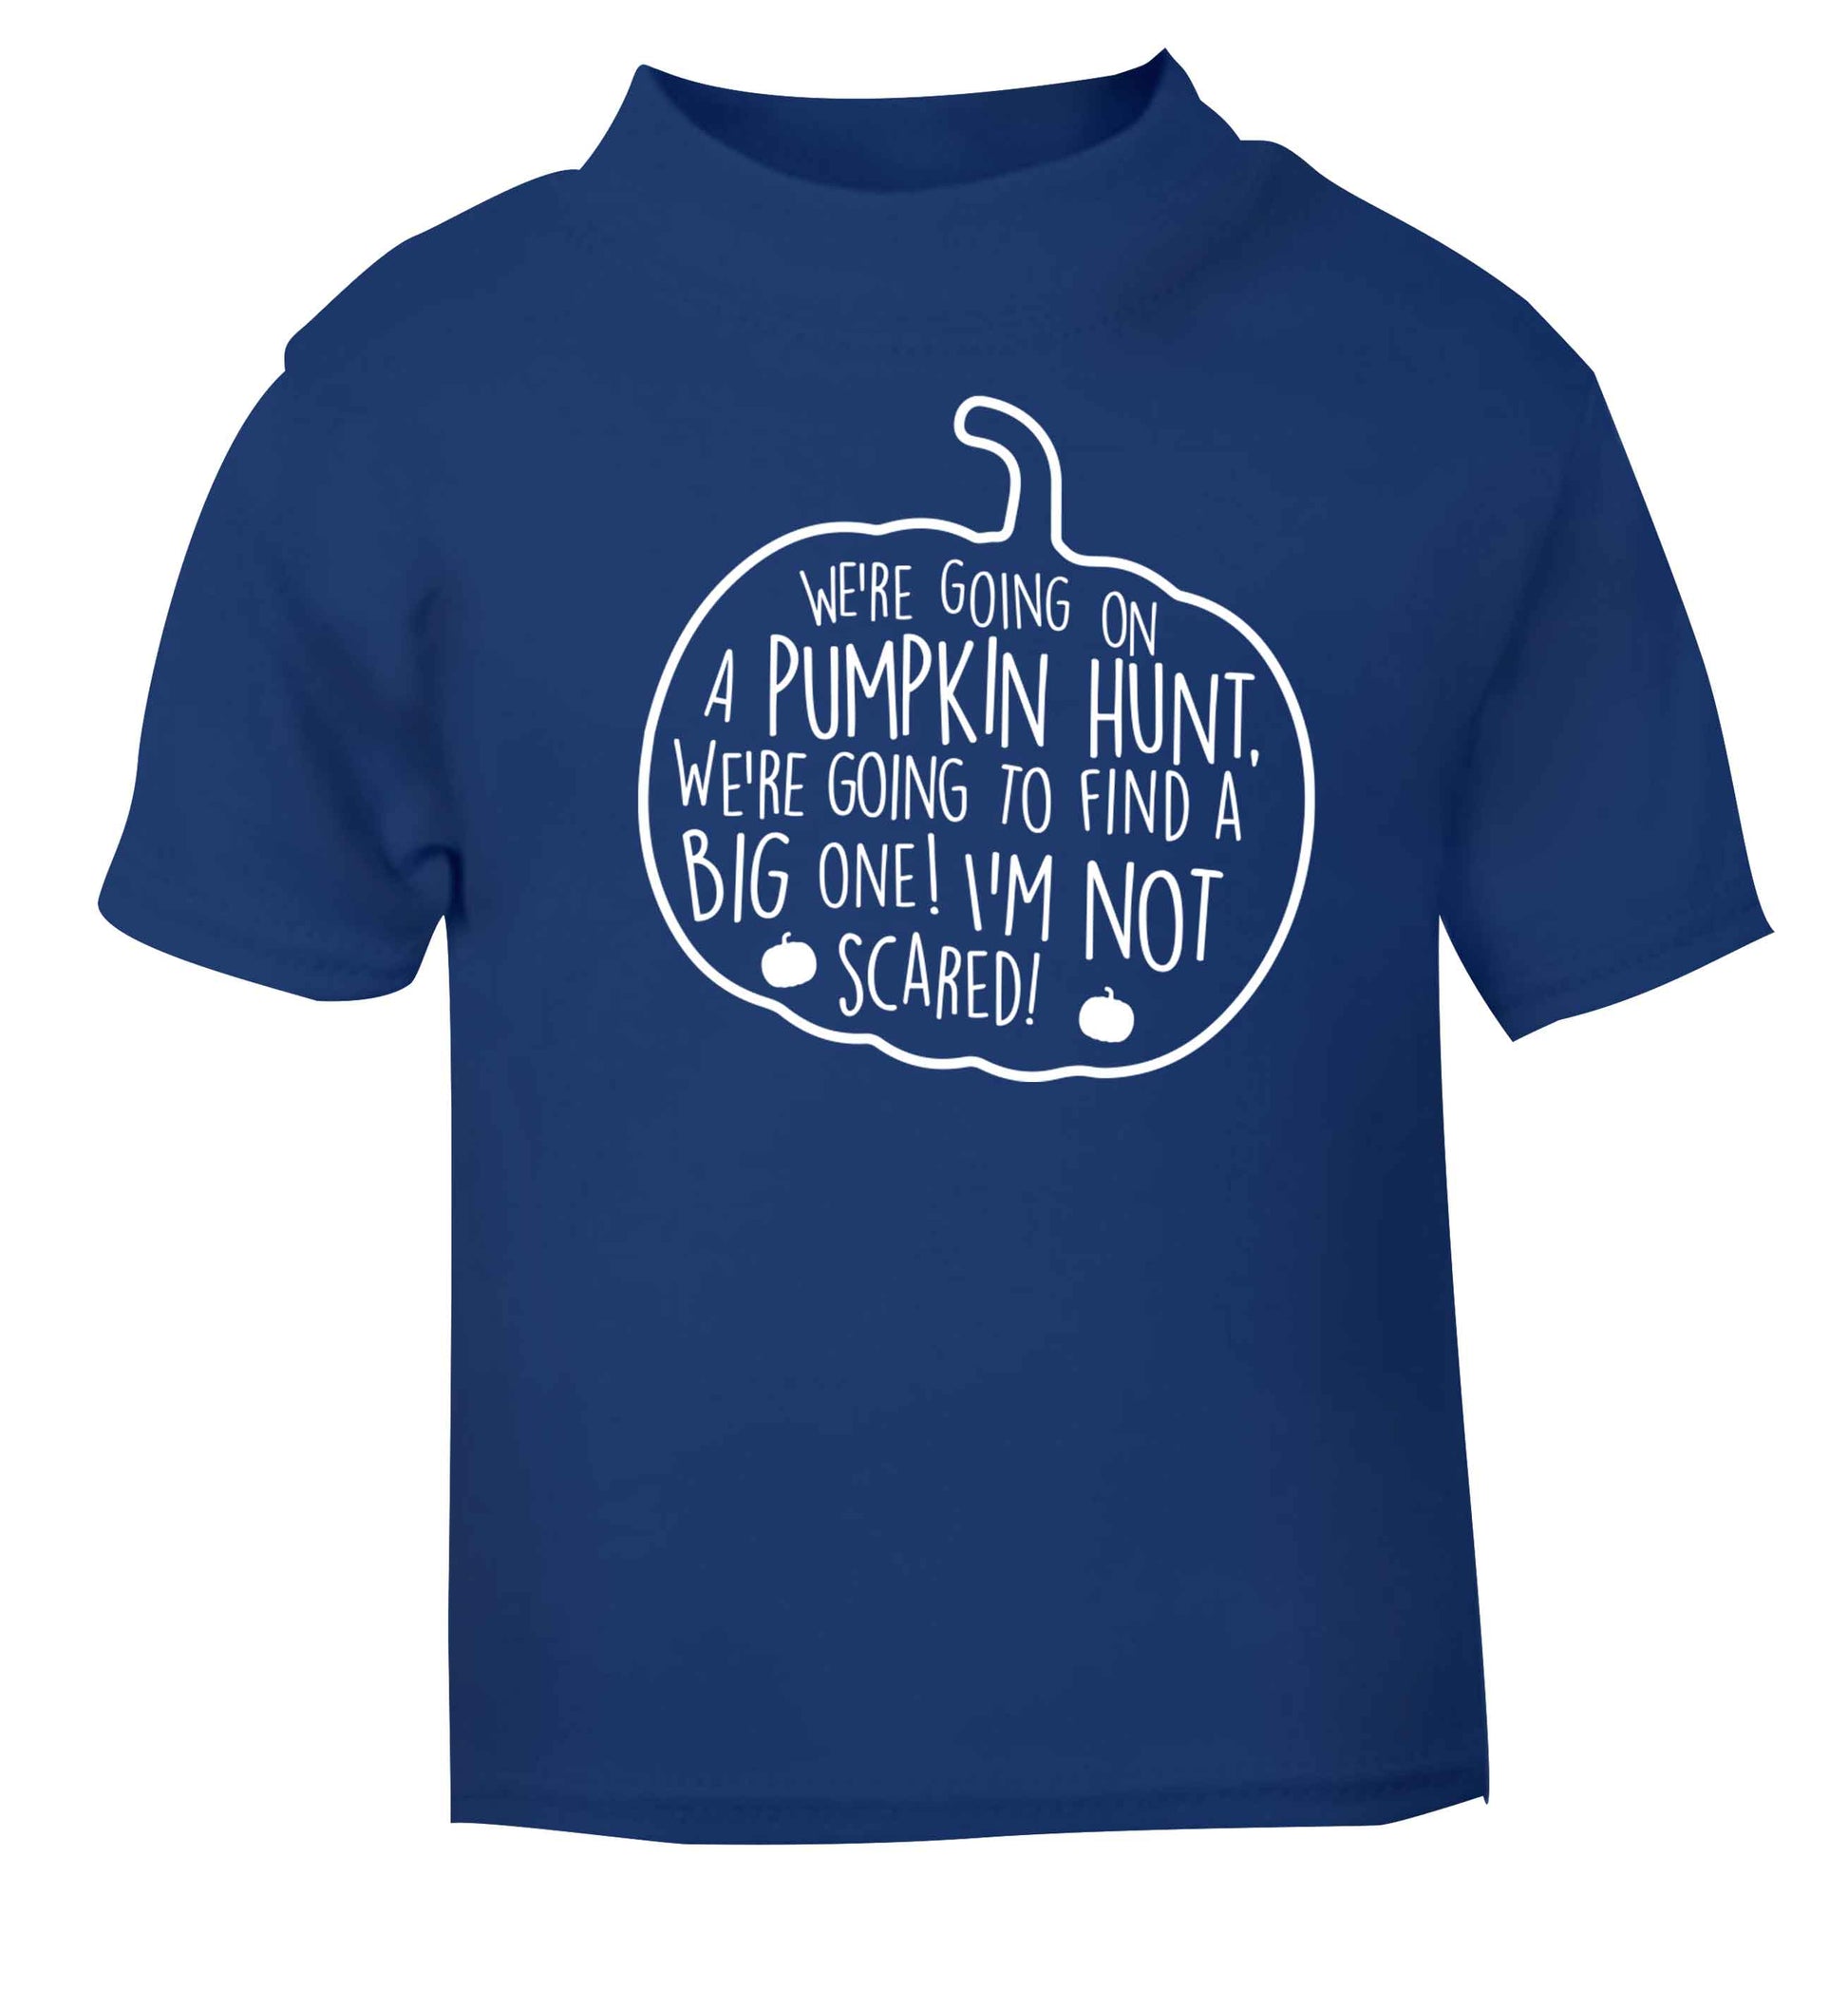 We're going on a pumpkin hunt blue baby toddler Tshirt 2 Years